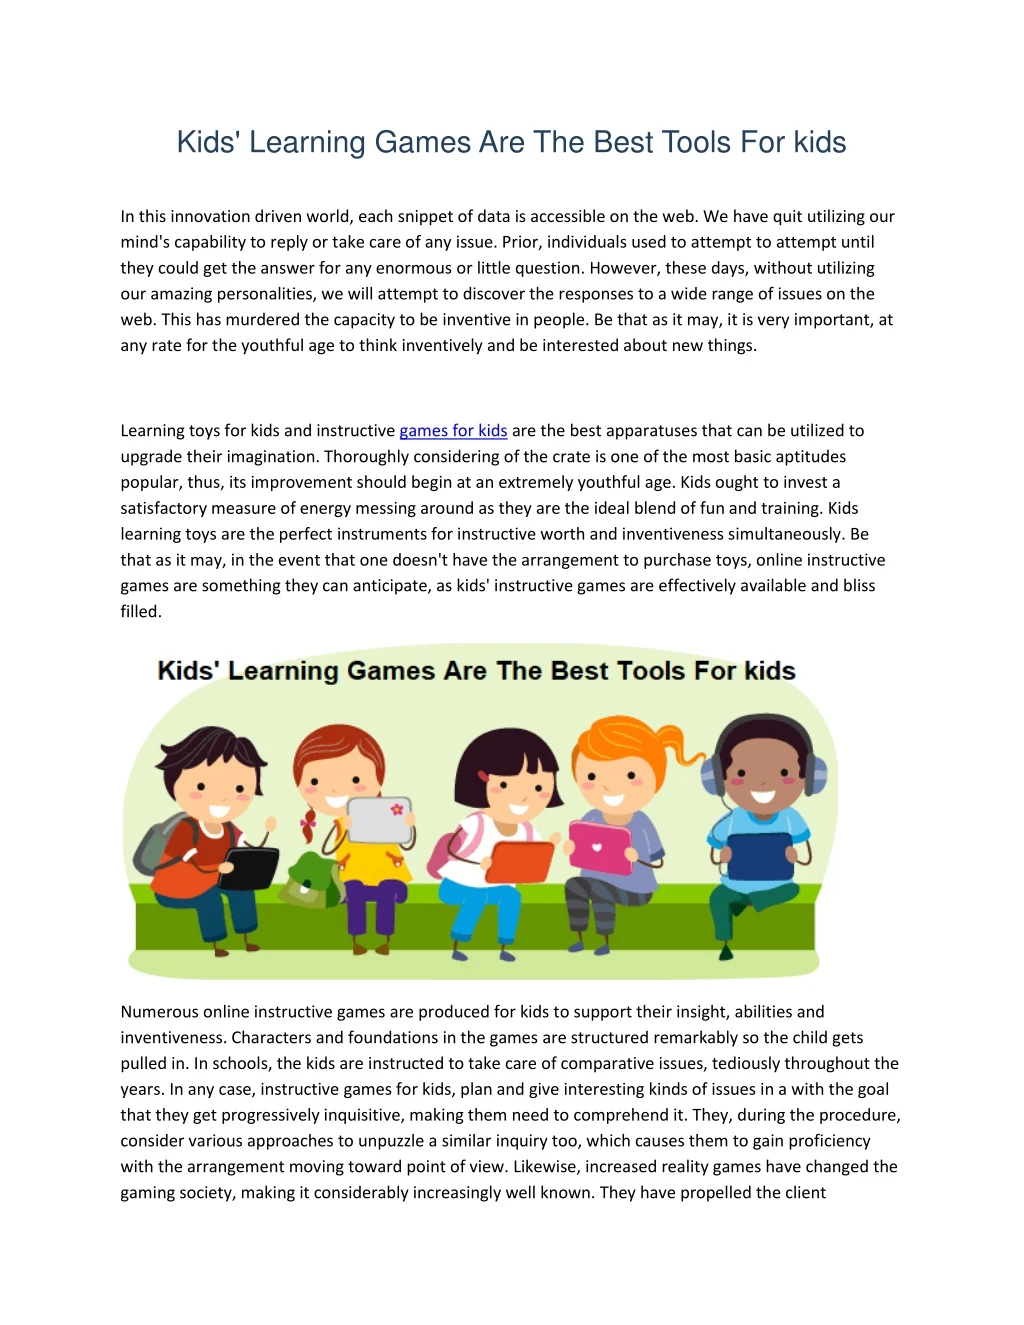 kids learning games are the best tools for kids